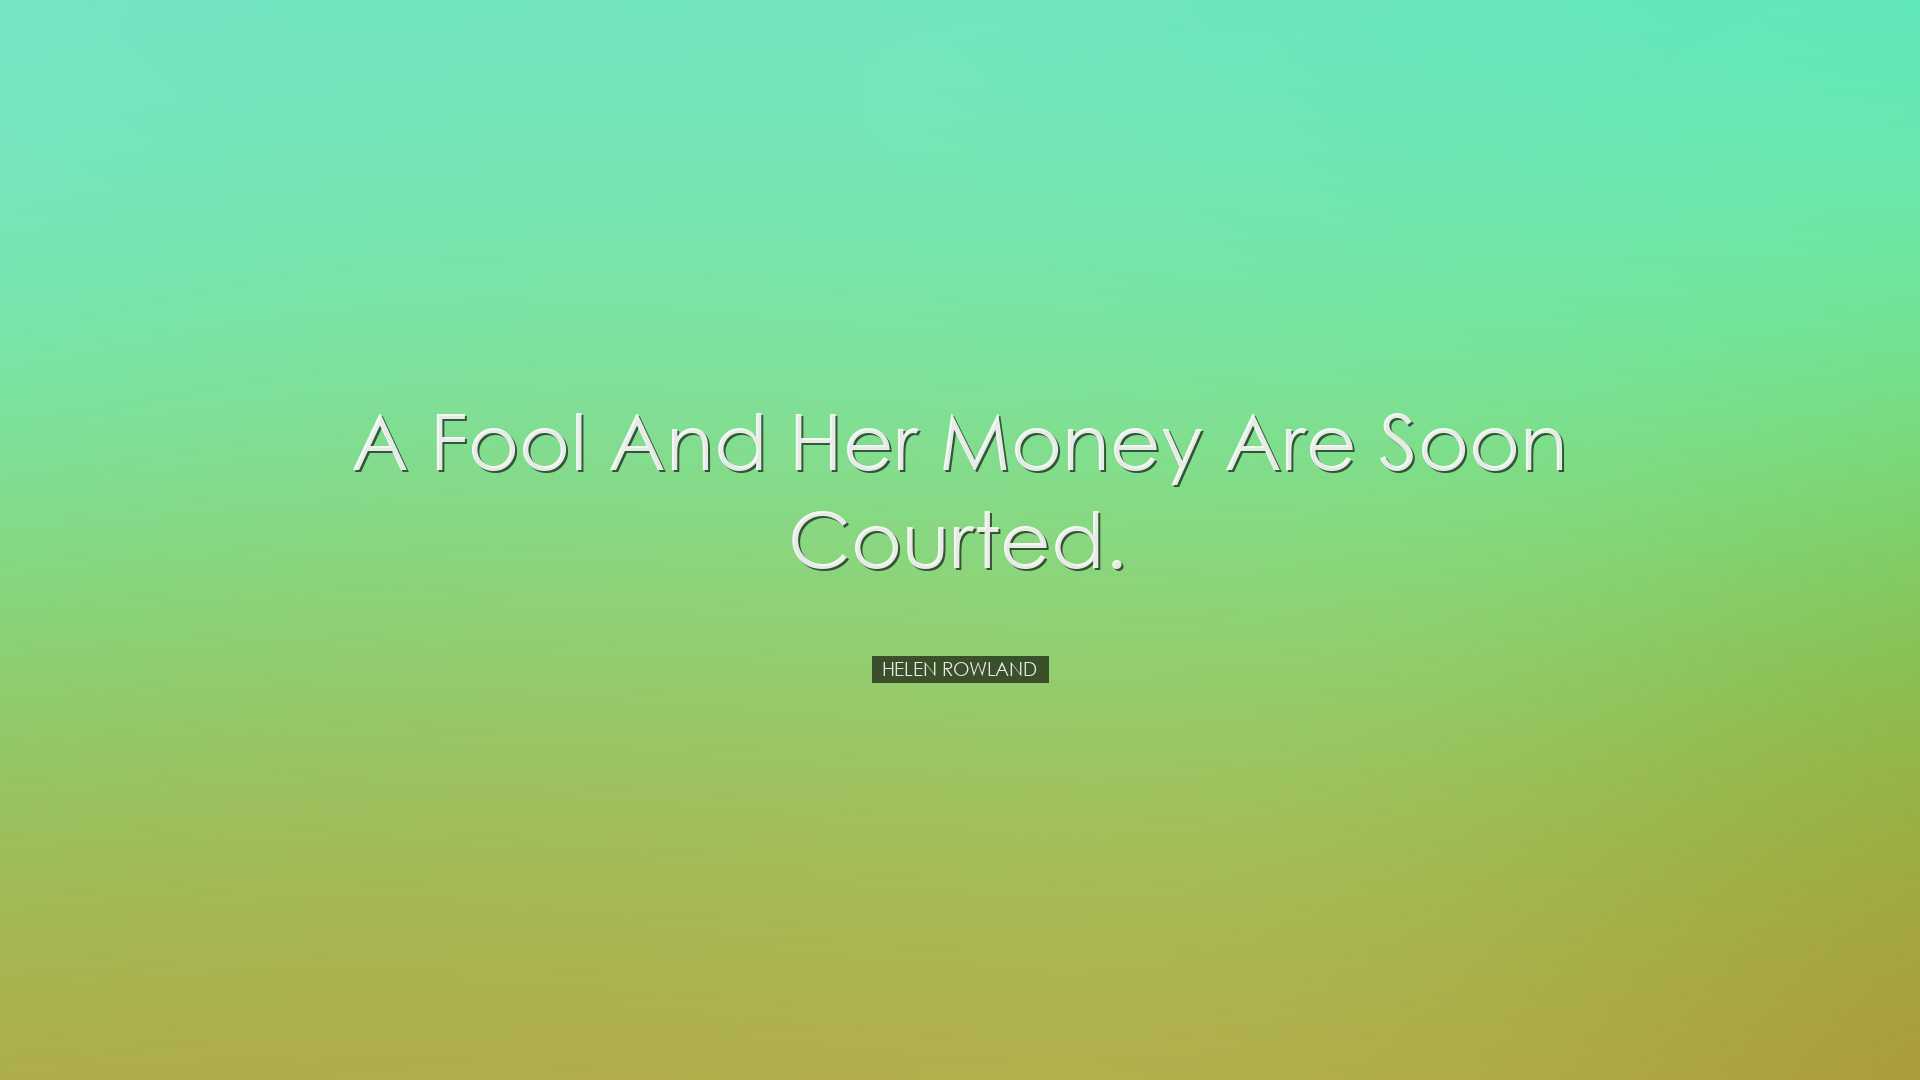 A fool and her money are soon courted. - Helen Rowland